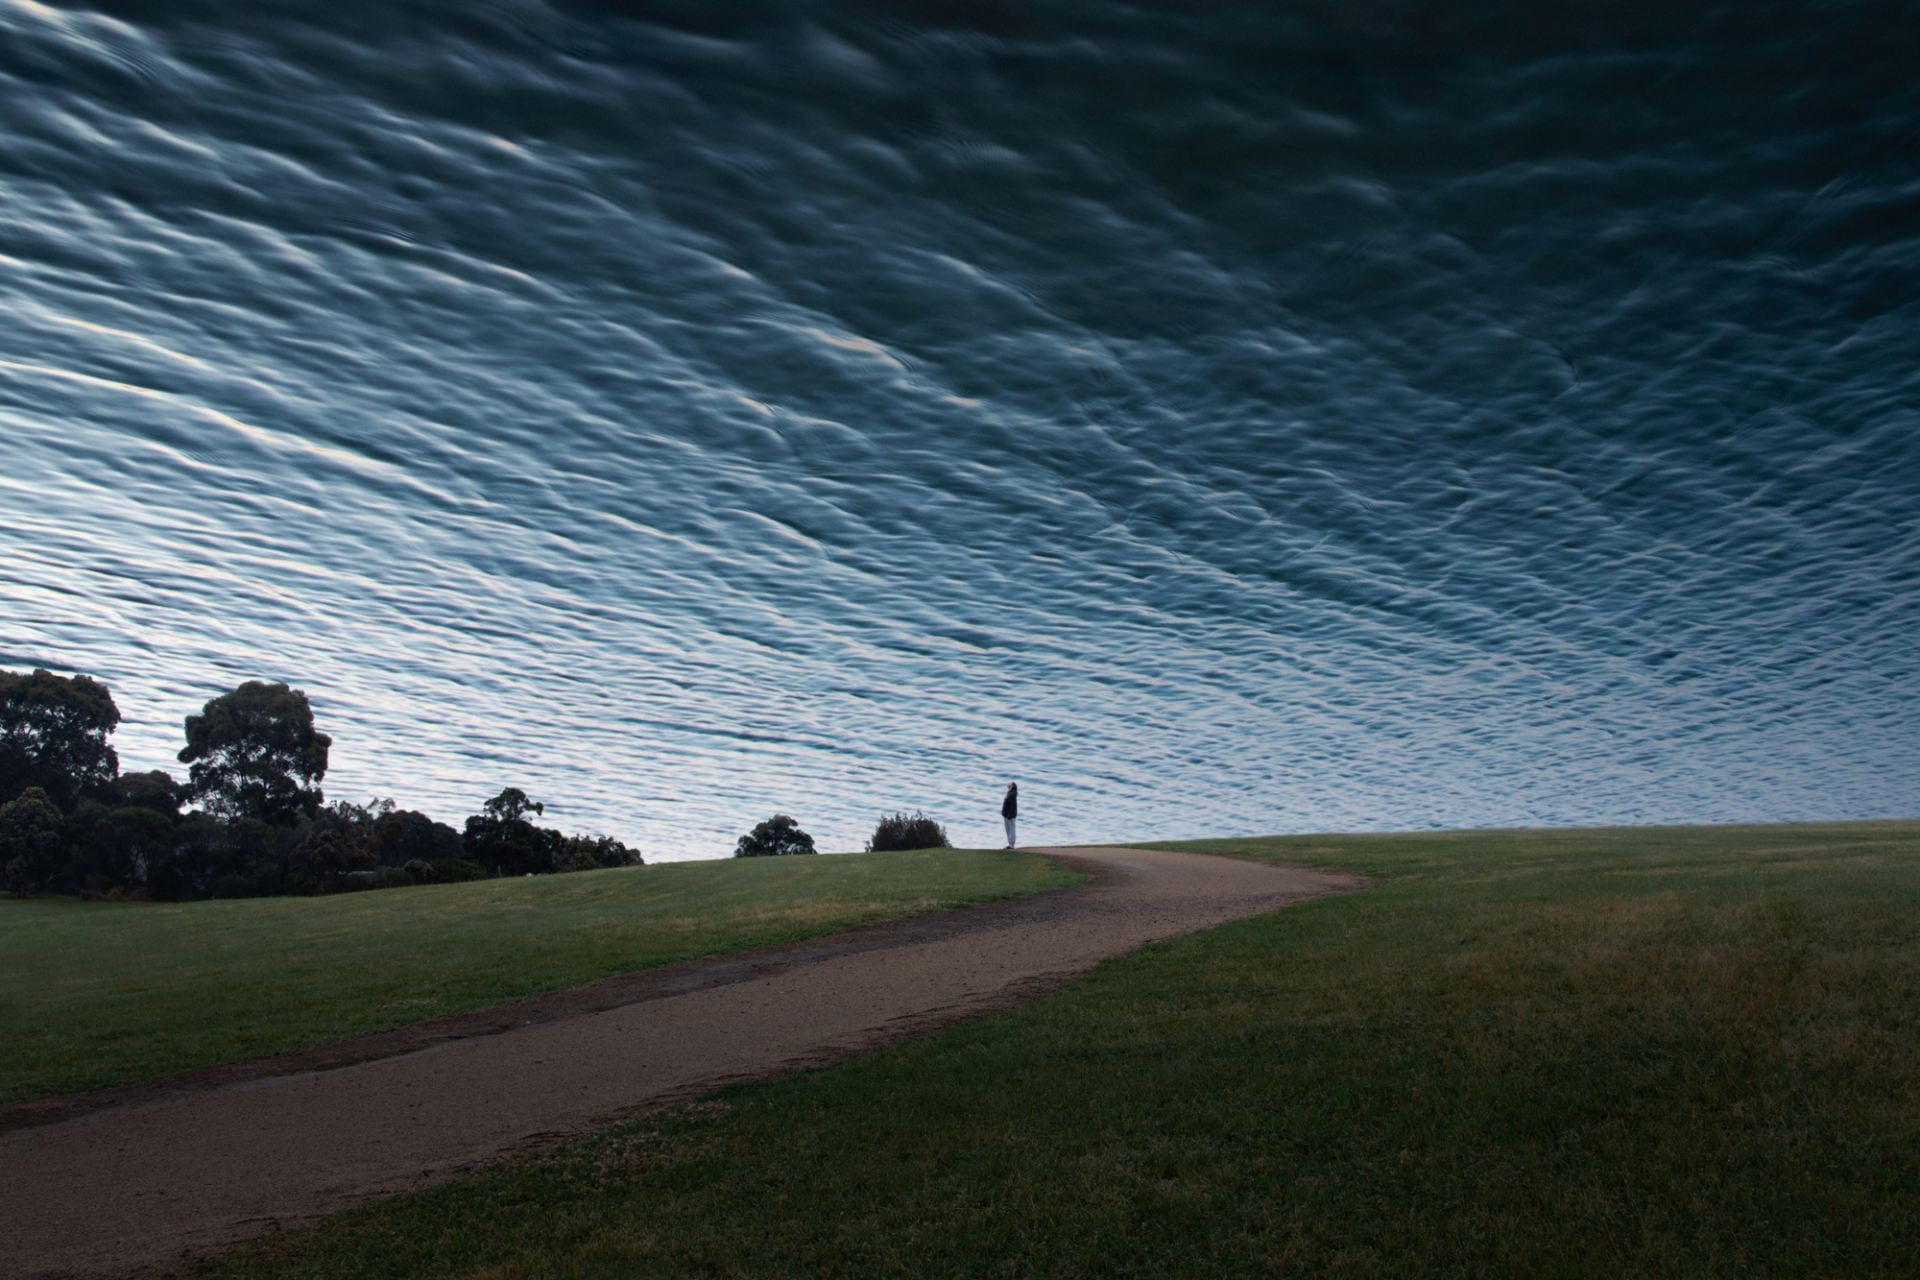 Photograph of a person looking up to the ocean in the sky